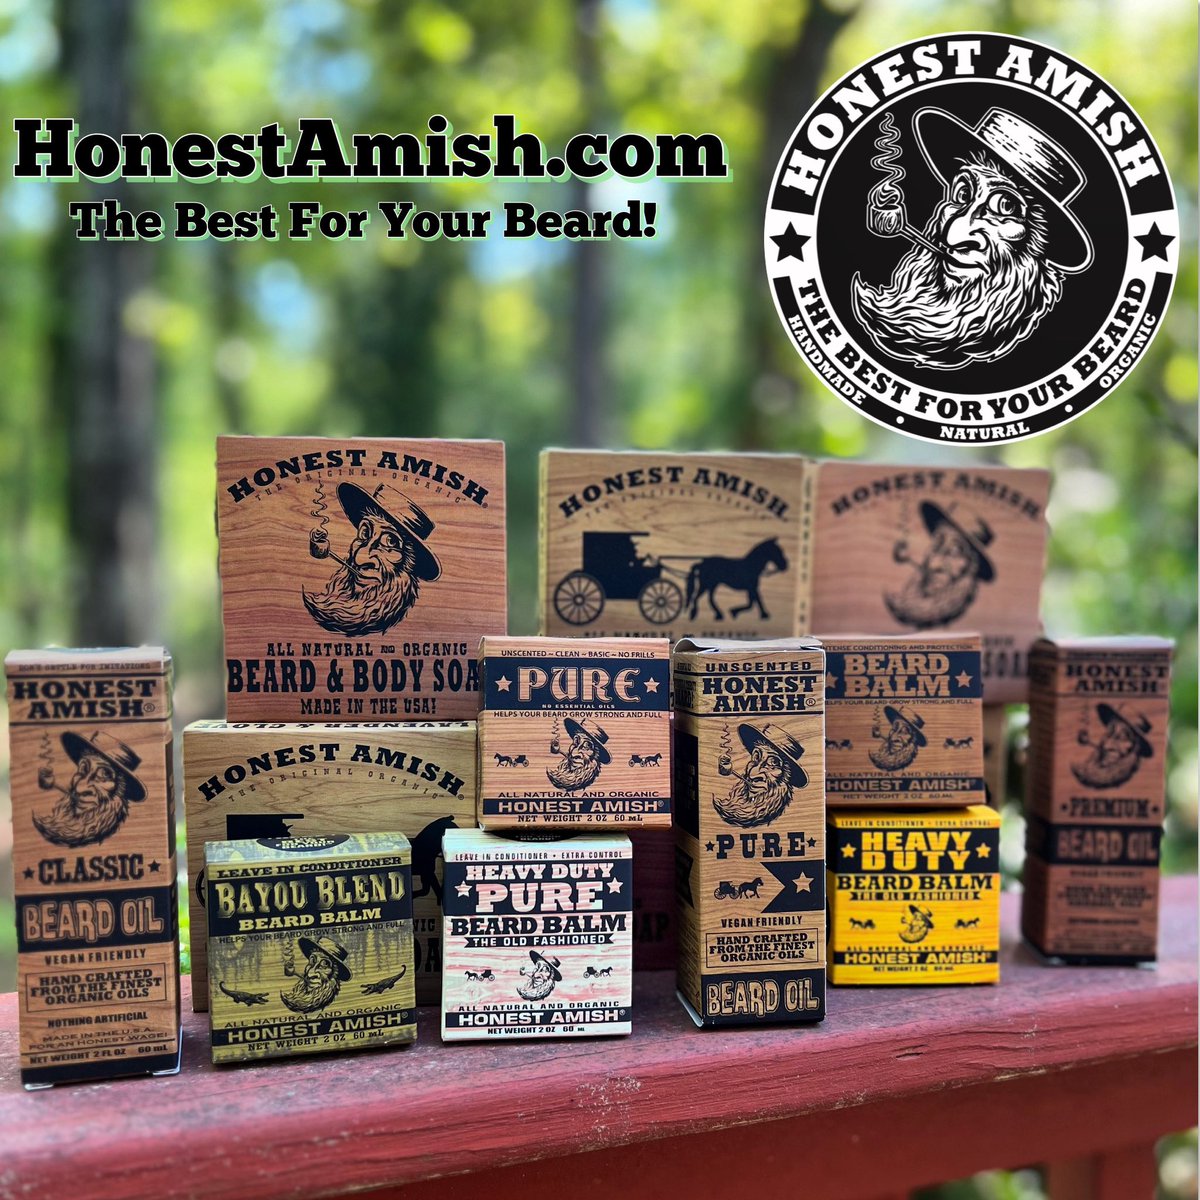 Head on over to HonestAmish.com to check out our full line of all natural products! 

#naturalsoap | #thebestforyourbeard | #beardoil | #beardbalm | #beardwax | #honestamish HonestAmish.com